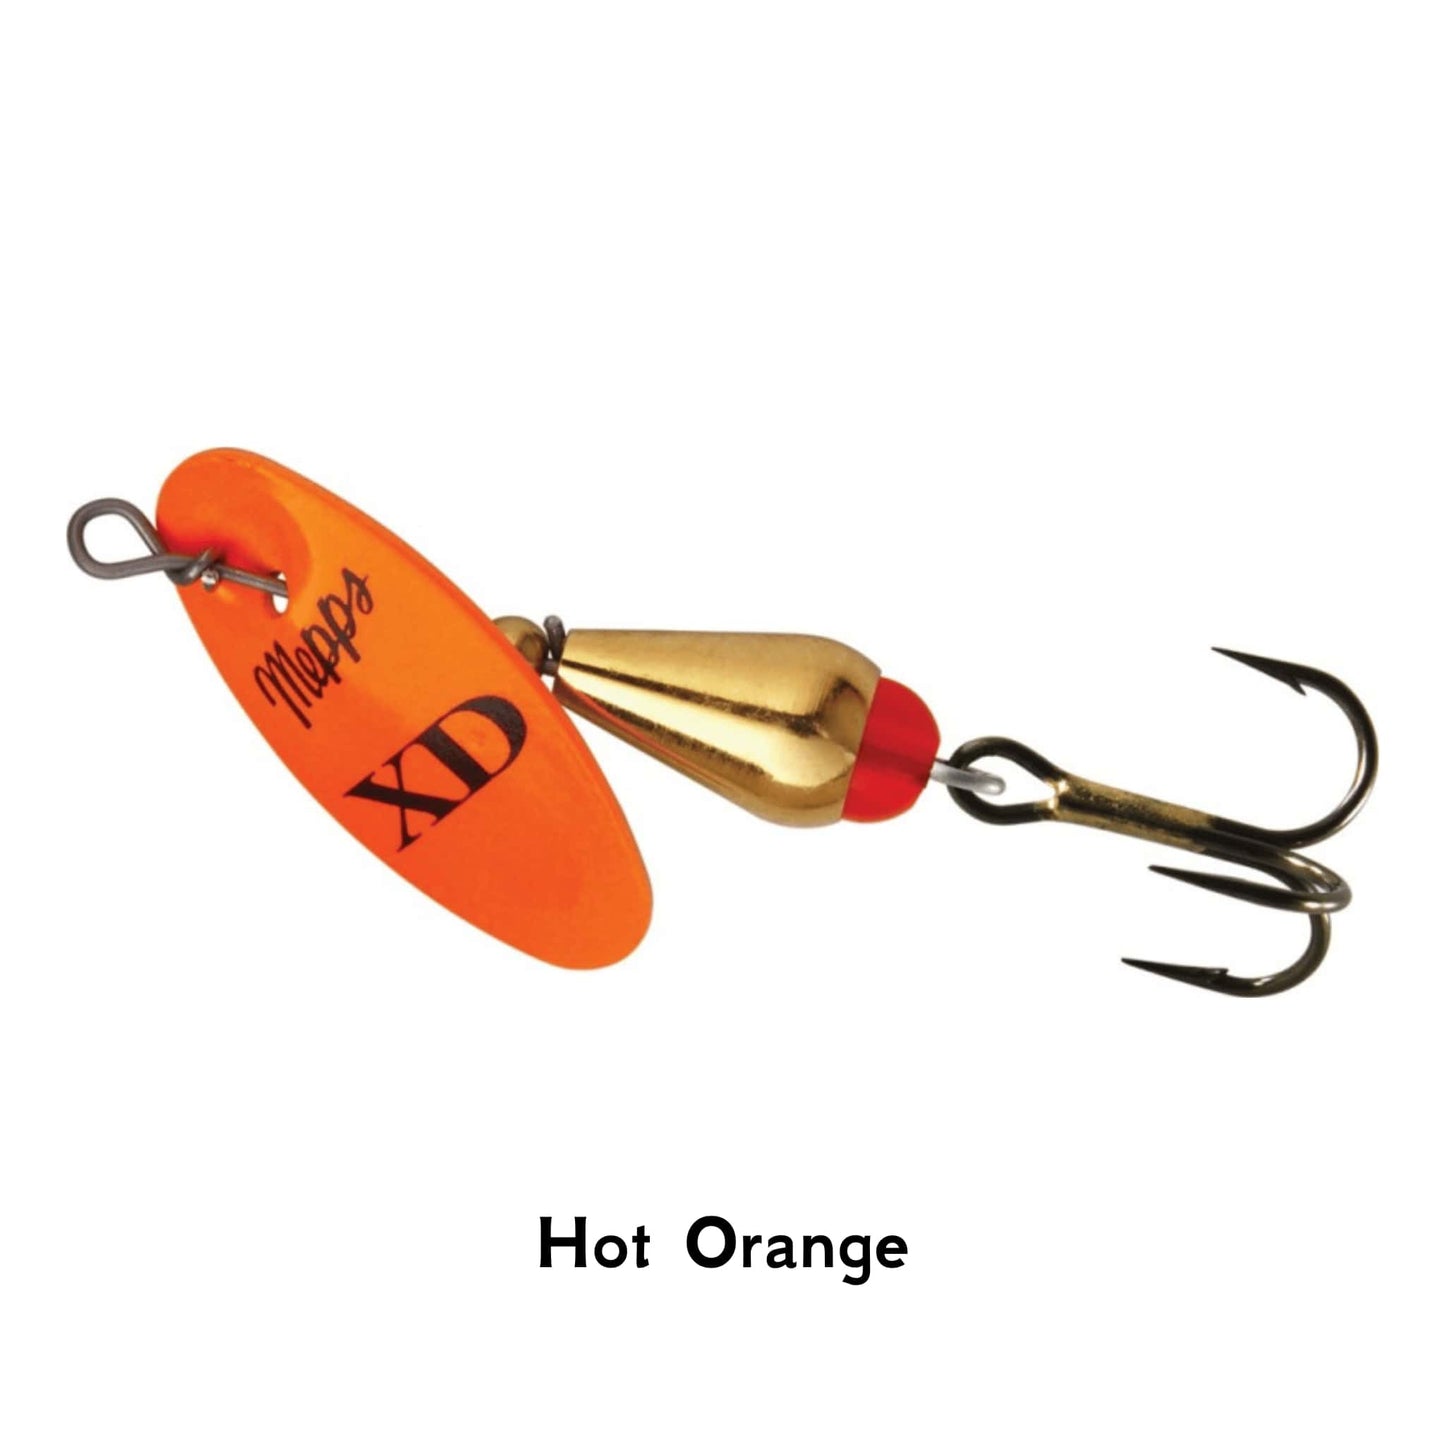 Mepps XD Xtra Deep Hot Orange Spoon Fishing Lure All Colours Size 2 3 Pike Perch Zander Spinner Vertical Jig